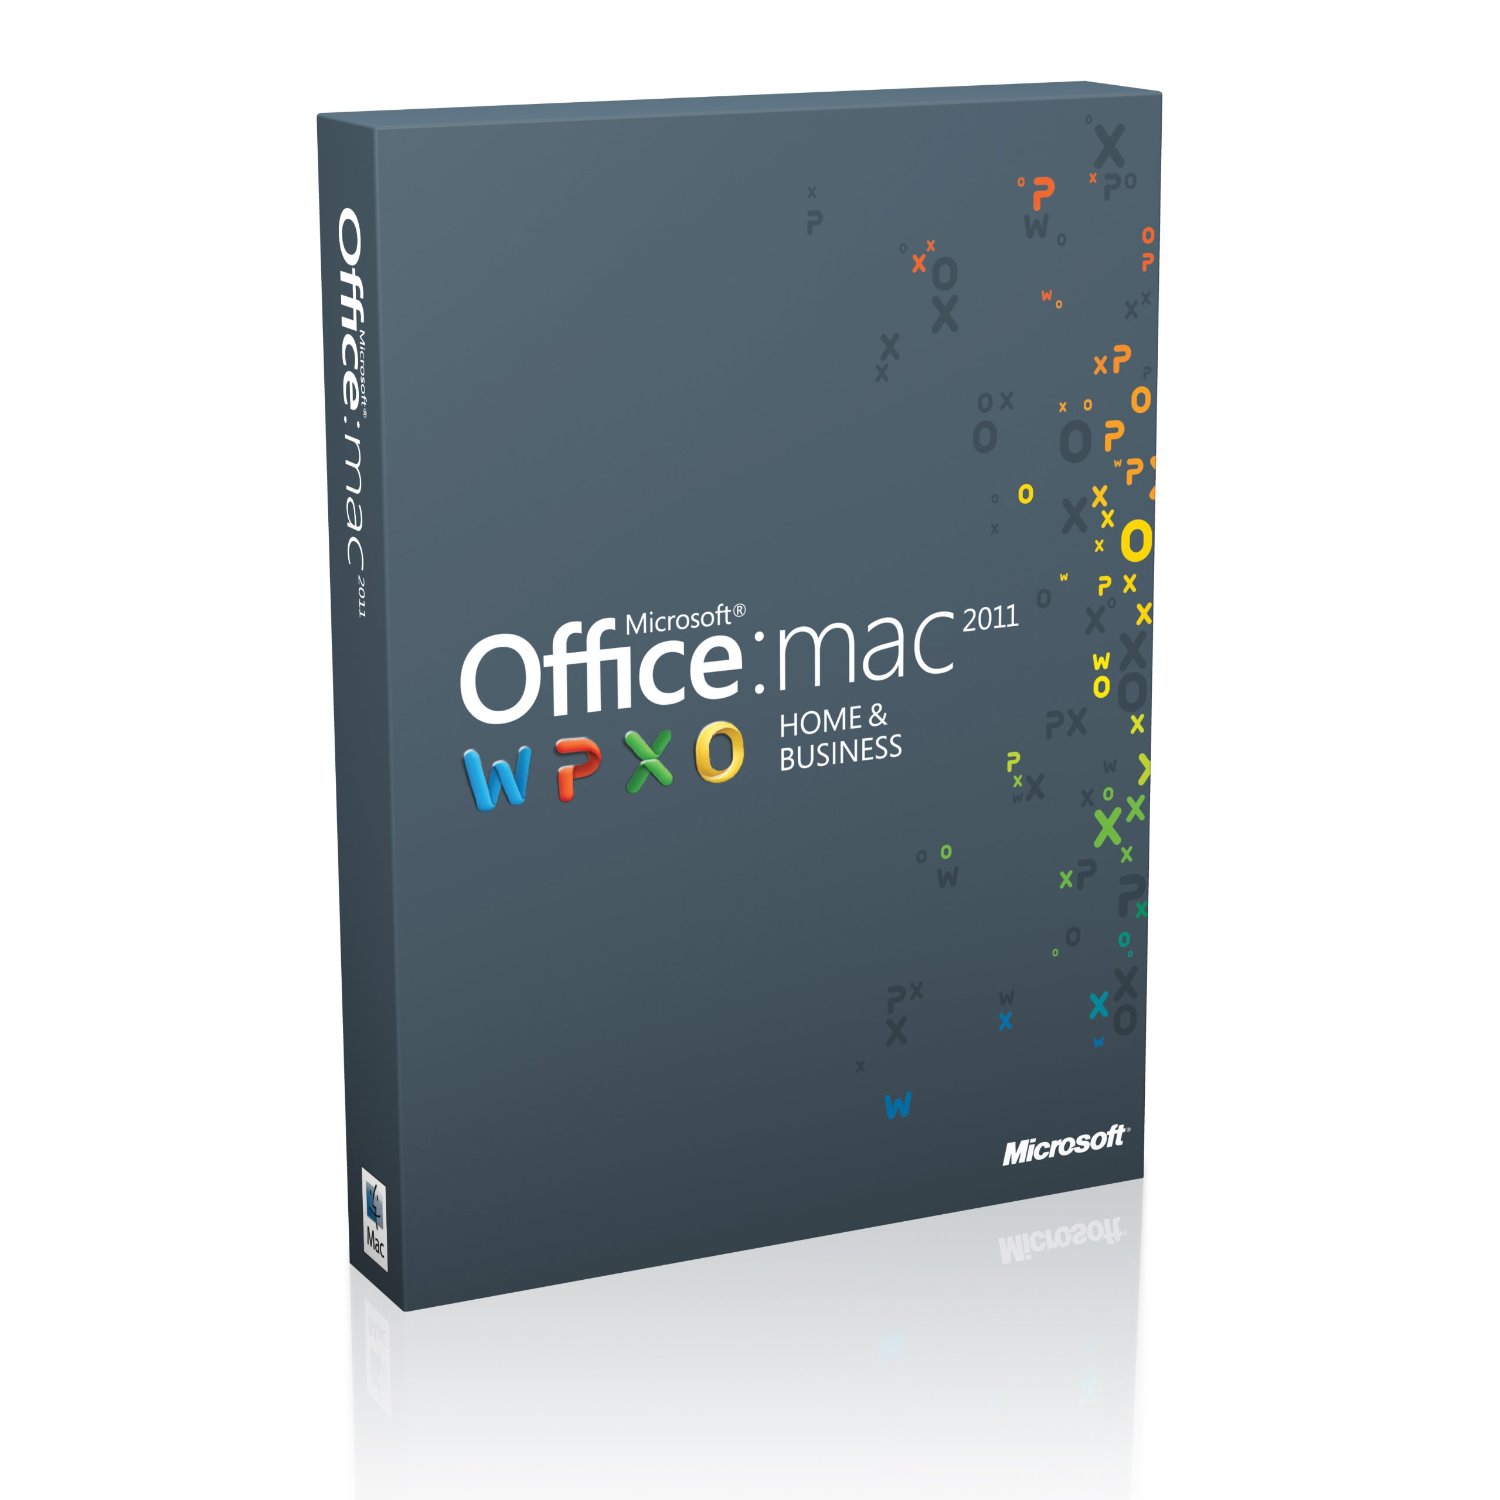 ms office for mac home and student 2011